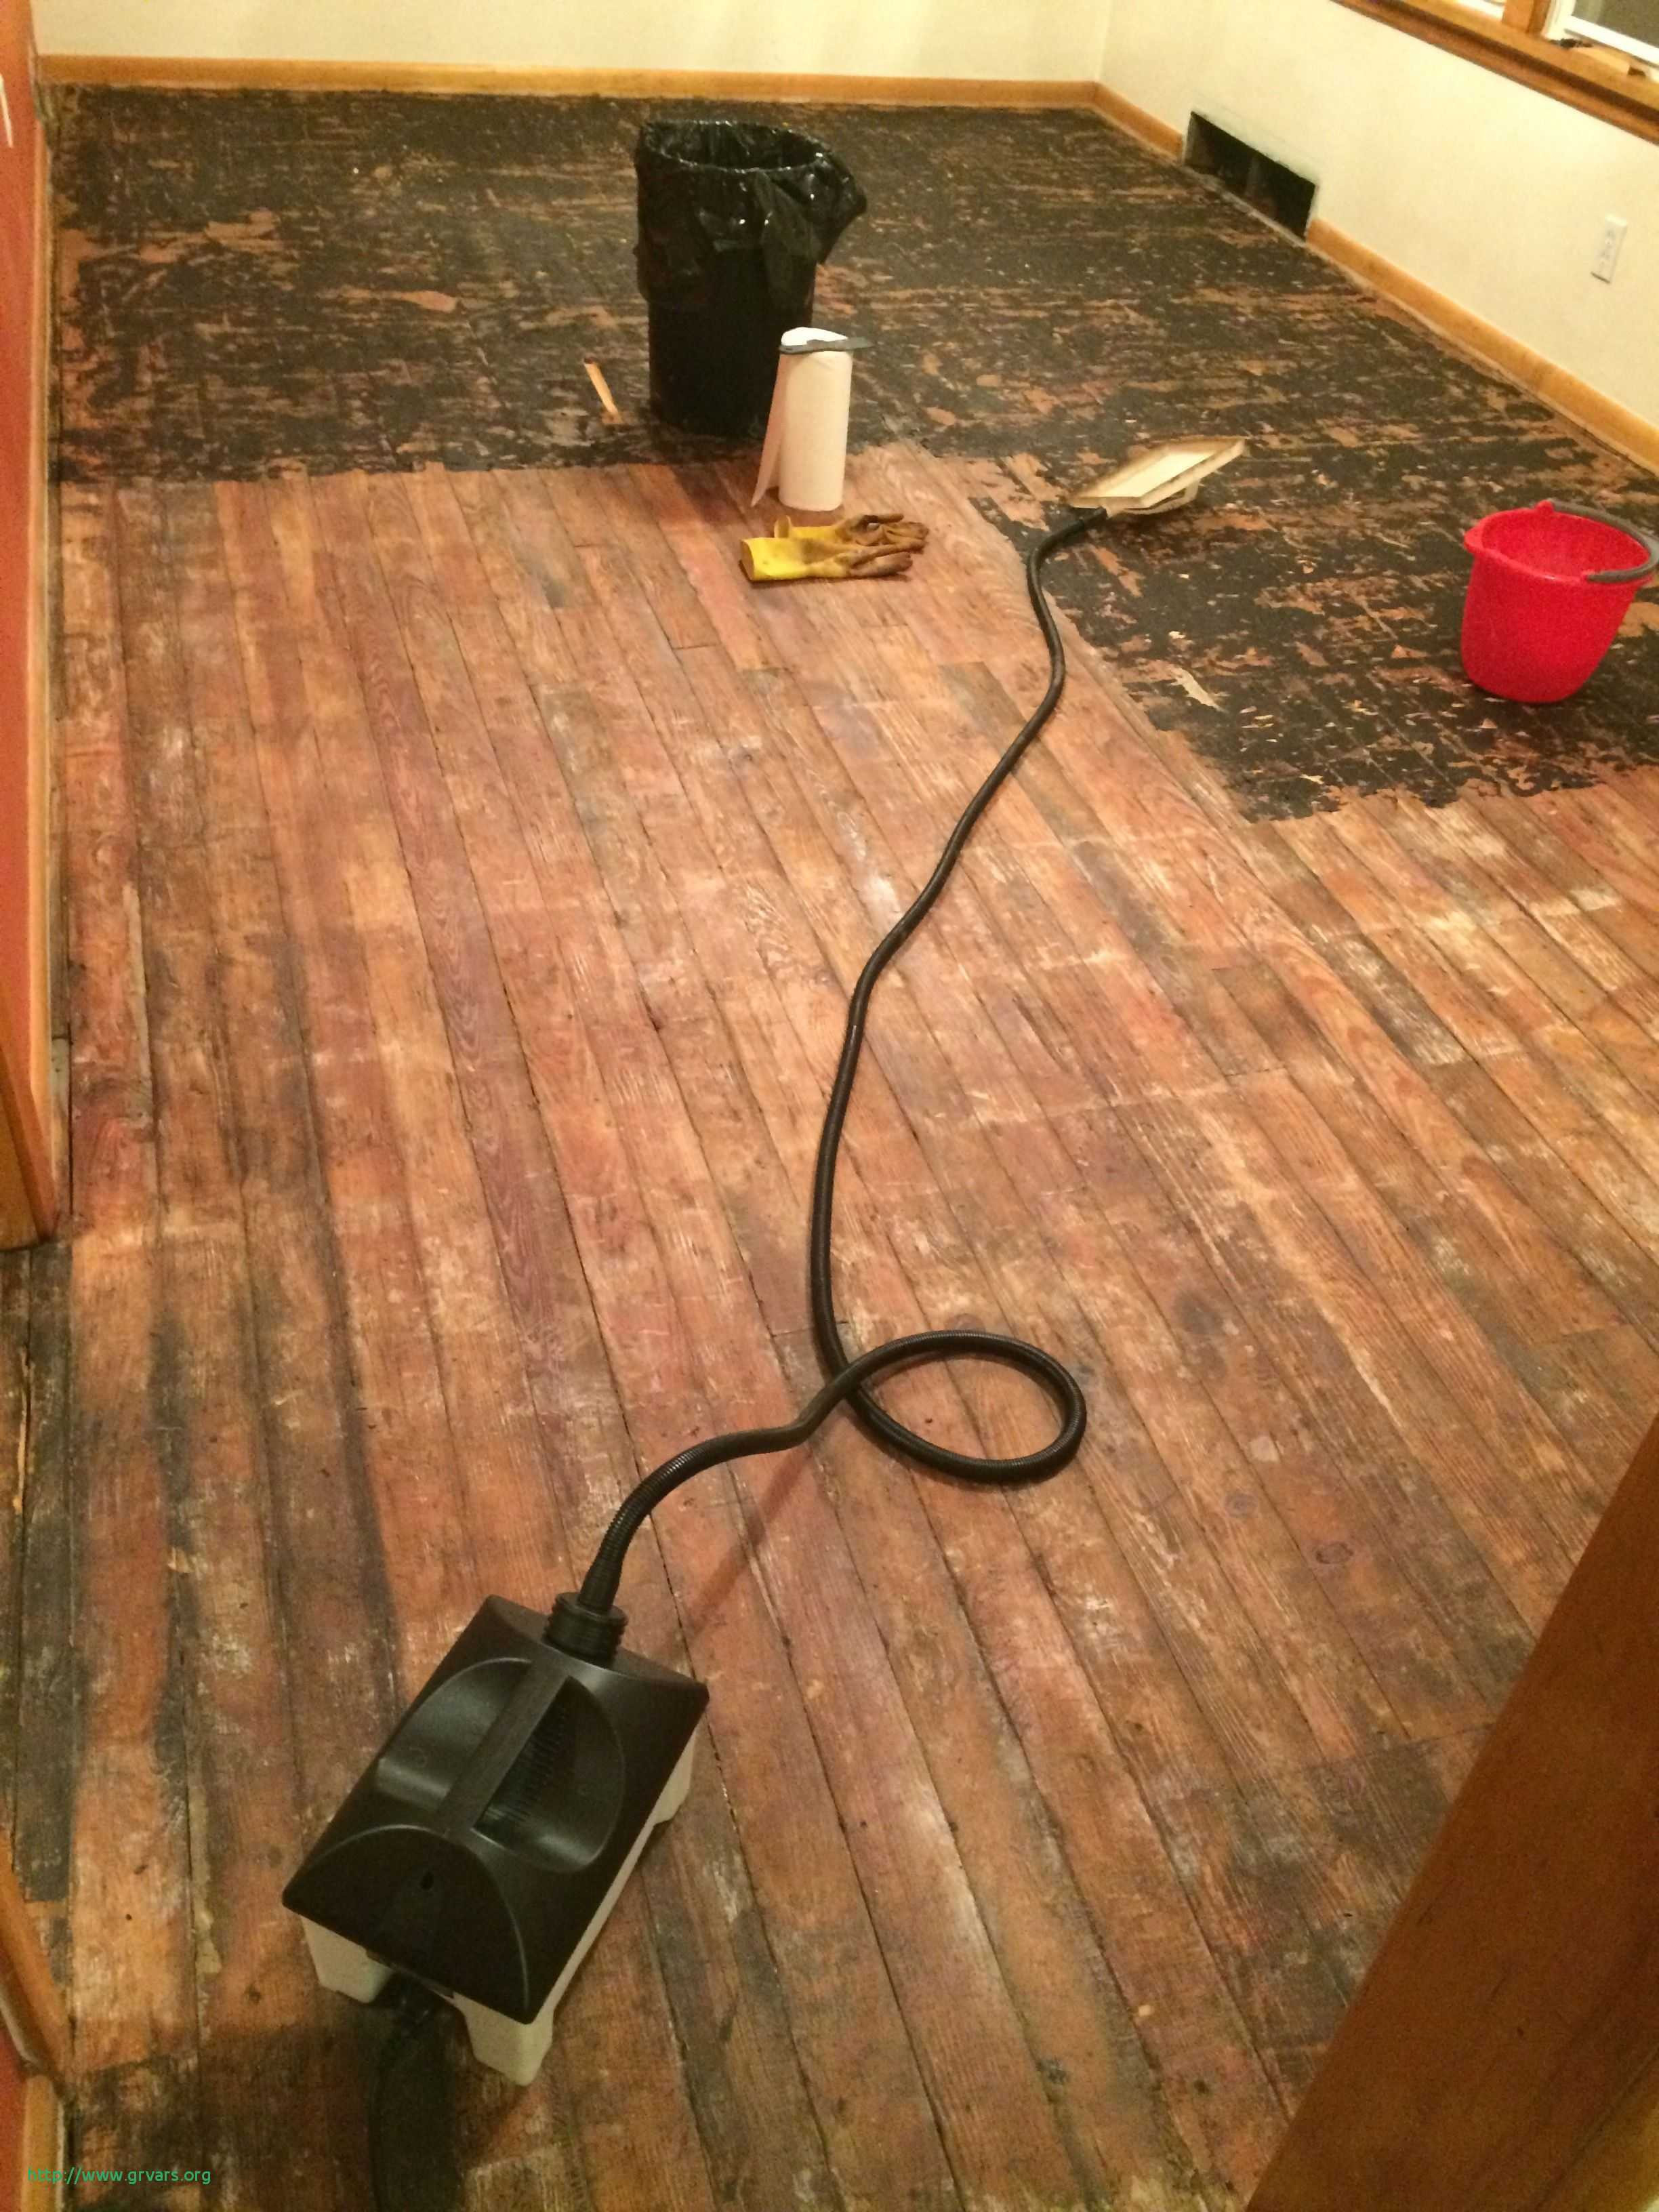 21 Great Gluing Hardwood Floors to Concrete 2024 free download gluing hardwood floors to concrete of 23 nouveau how to remove glued down wood flooring on concrete with regard to removing glue from hardwood floors luxury removing old tar paper and glue f